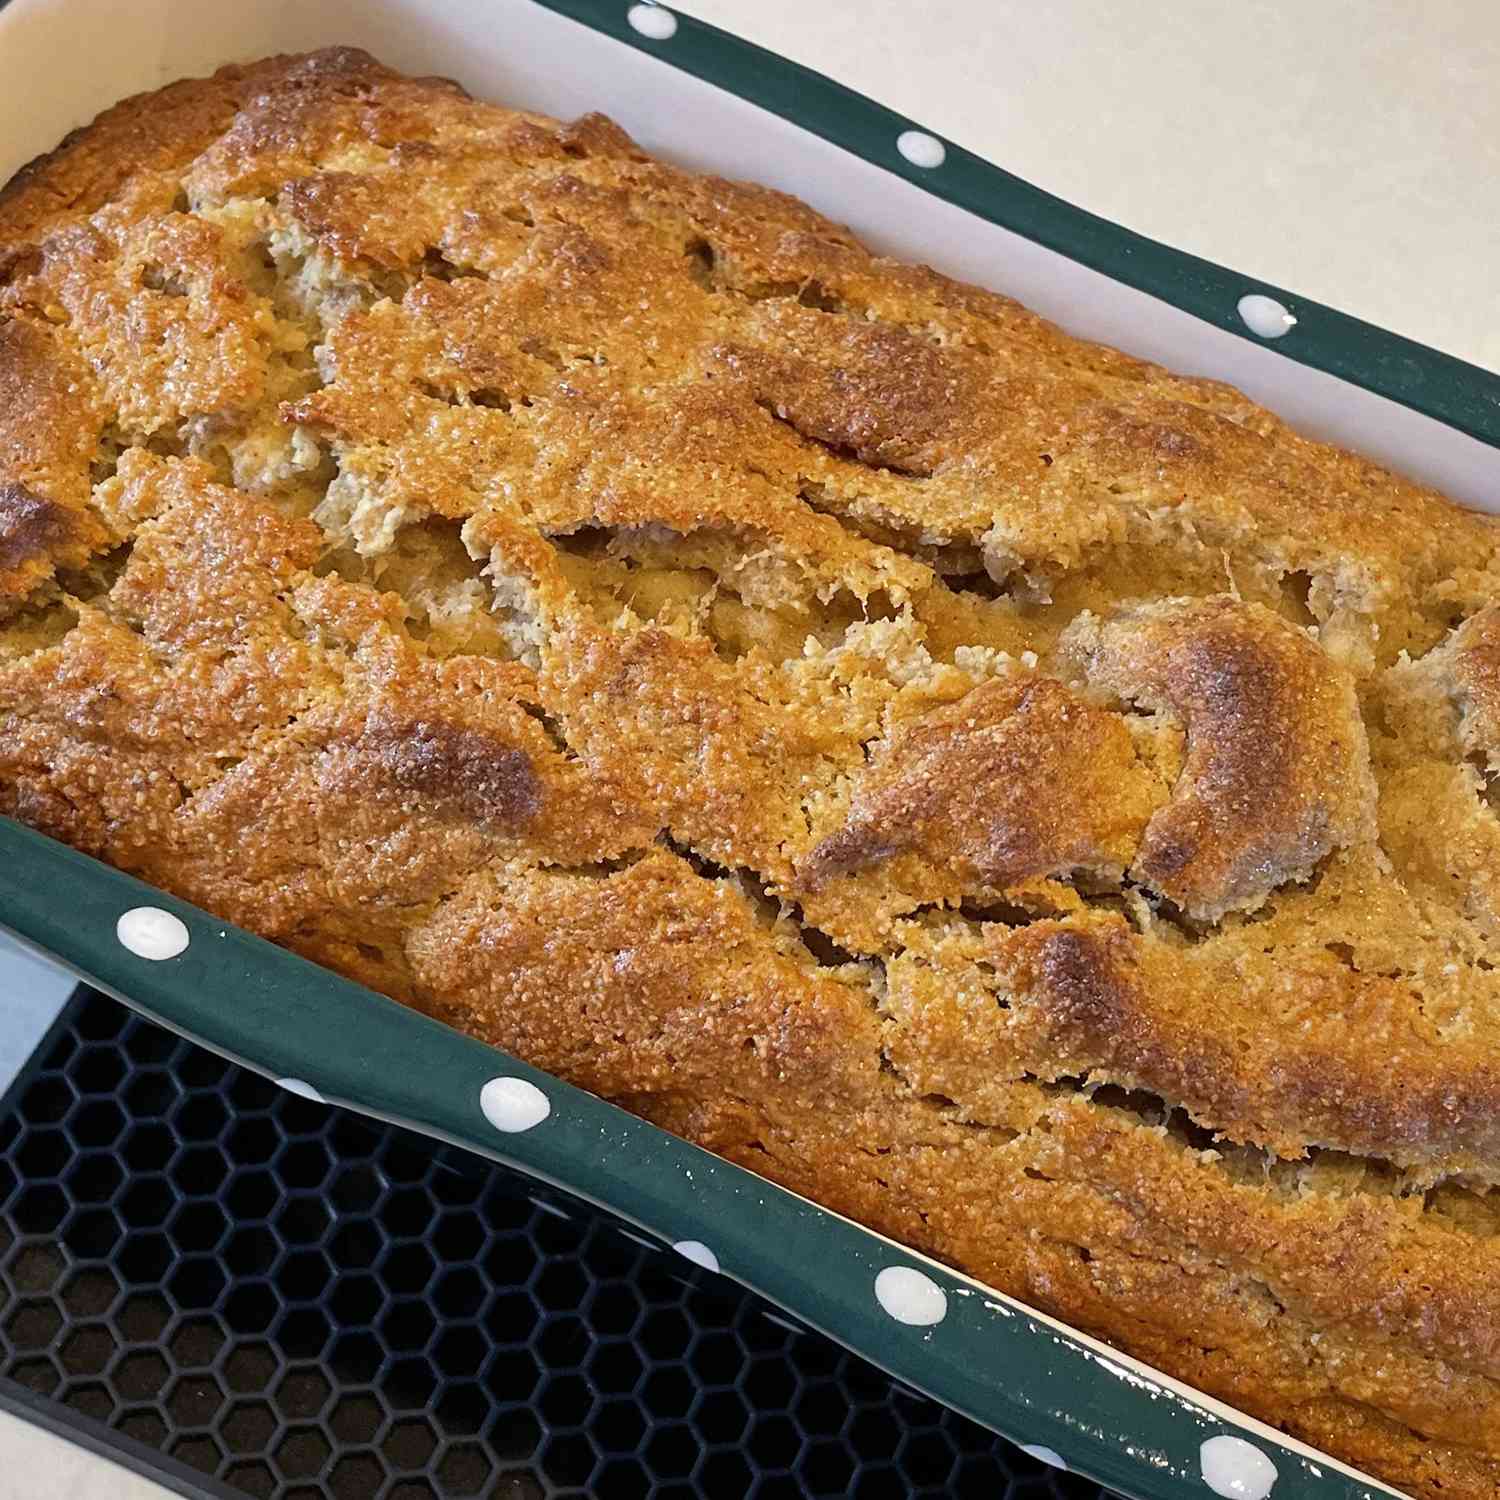 Close up view of Almond Flour Banana Bread in a baking dish